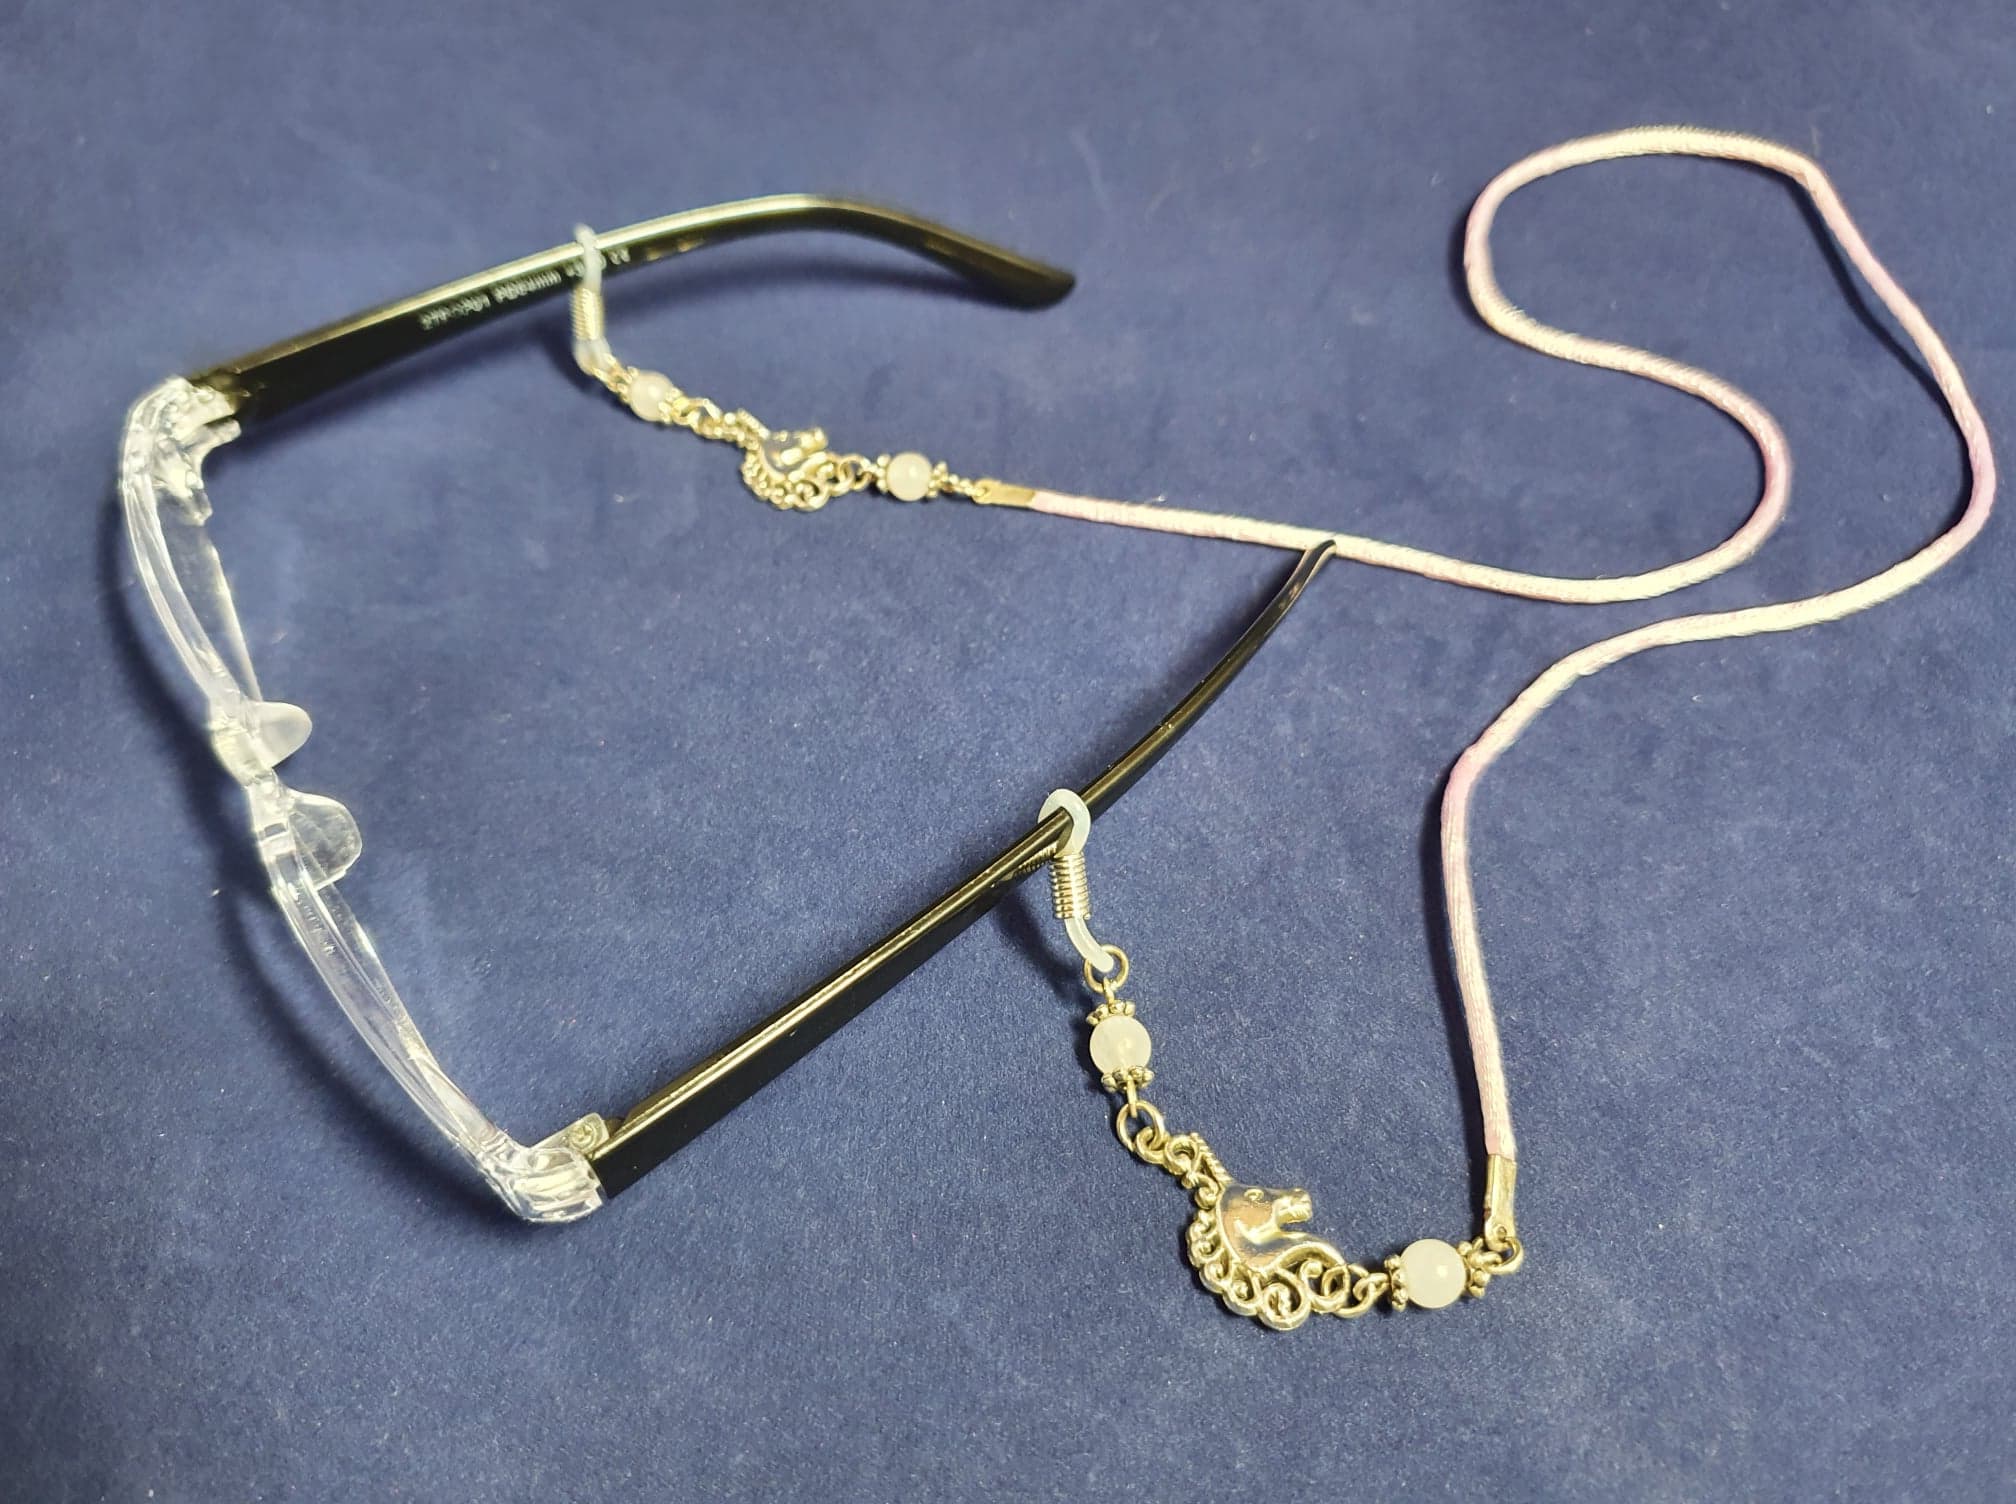 Glasses chain with unicorn charms and Rose Quartz. Pink satin cord.